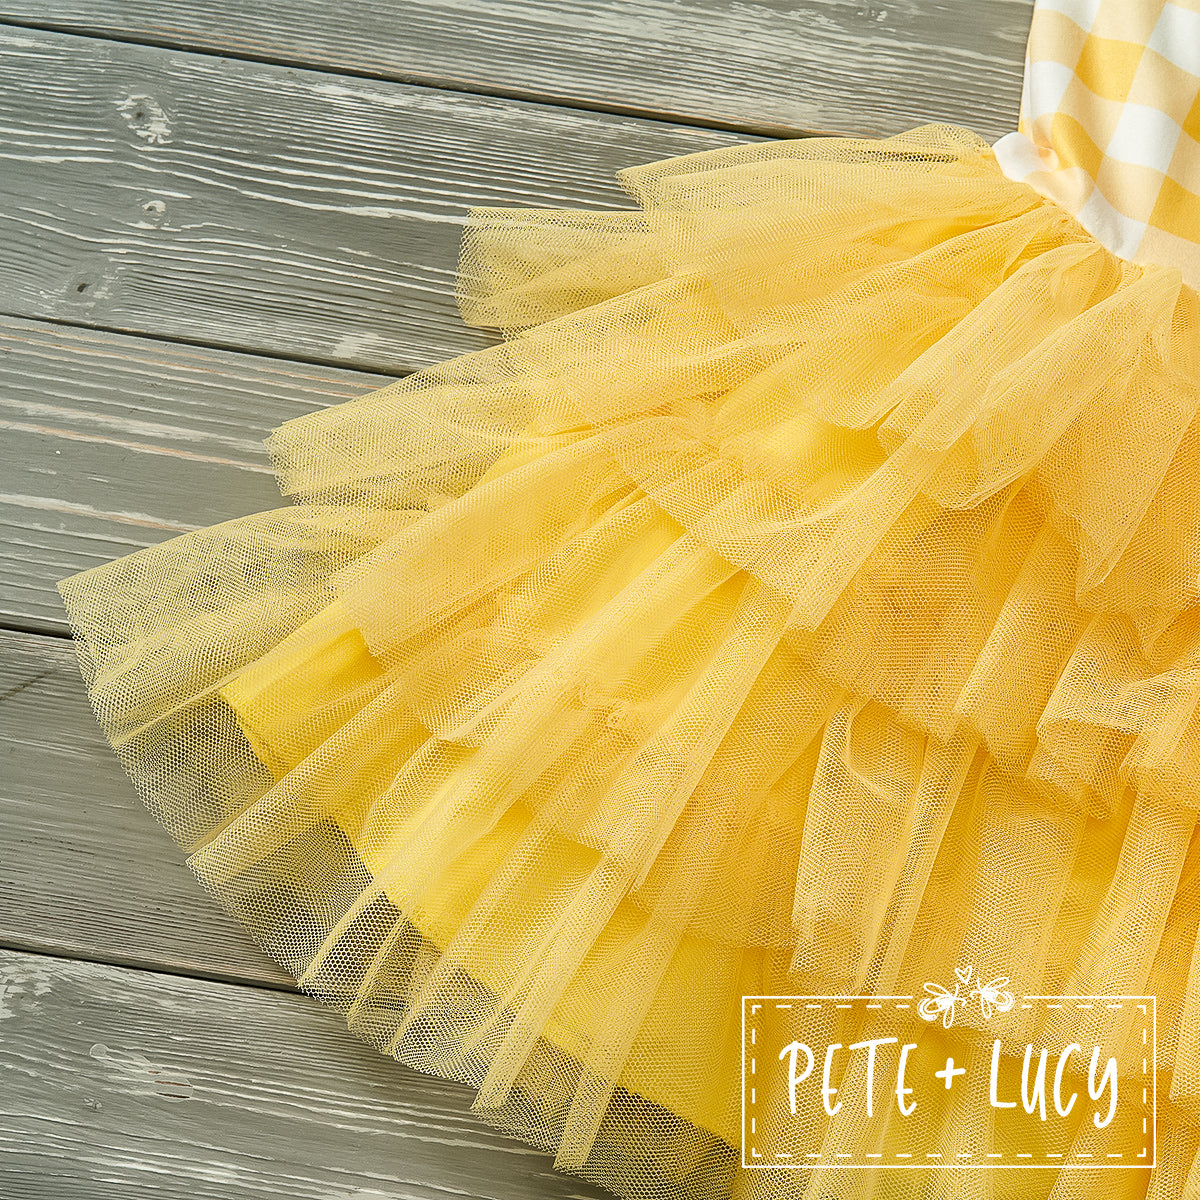 Princess Tulle: Yellow Tulle Dress